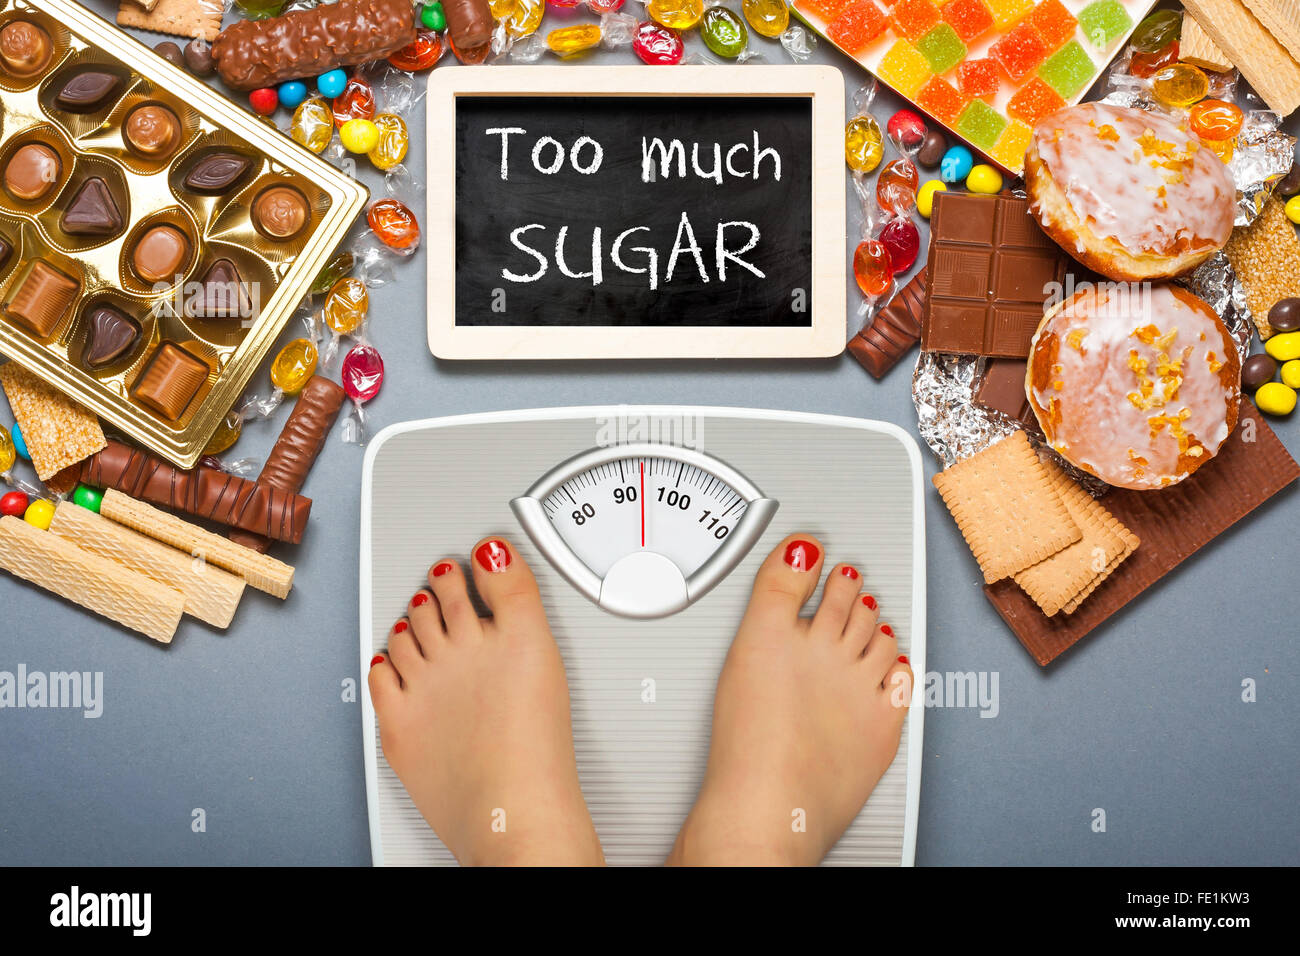 Unhealthy diet - overweight. Feet on bathroom scale and chocolate, jelly cubes, candies, chocolate bars, cookies, donuts Stock Photo